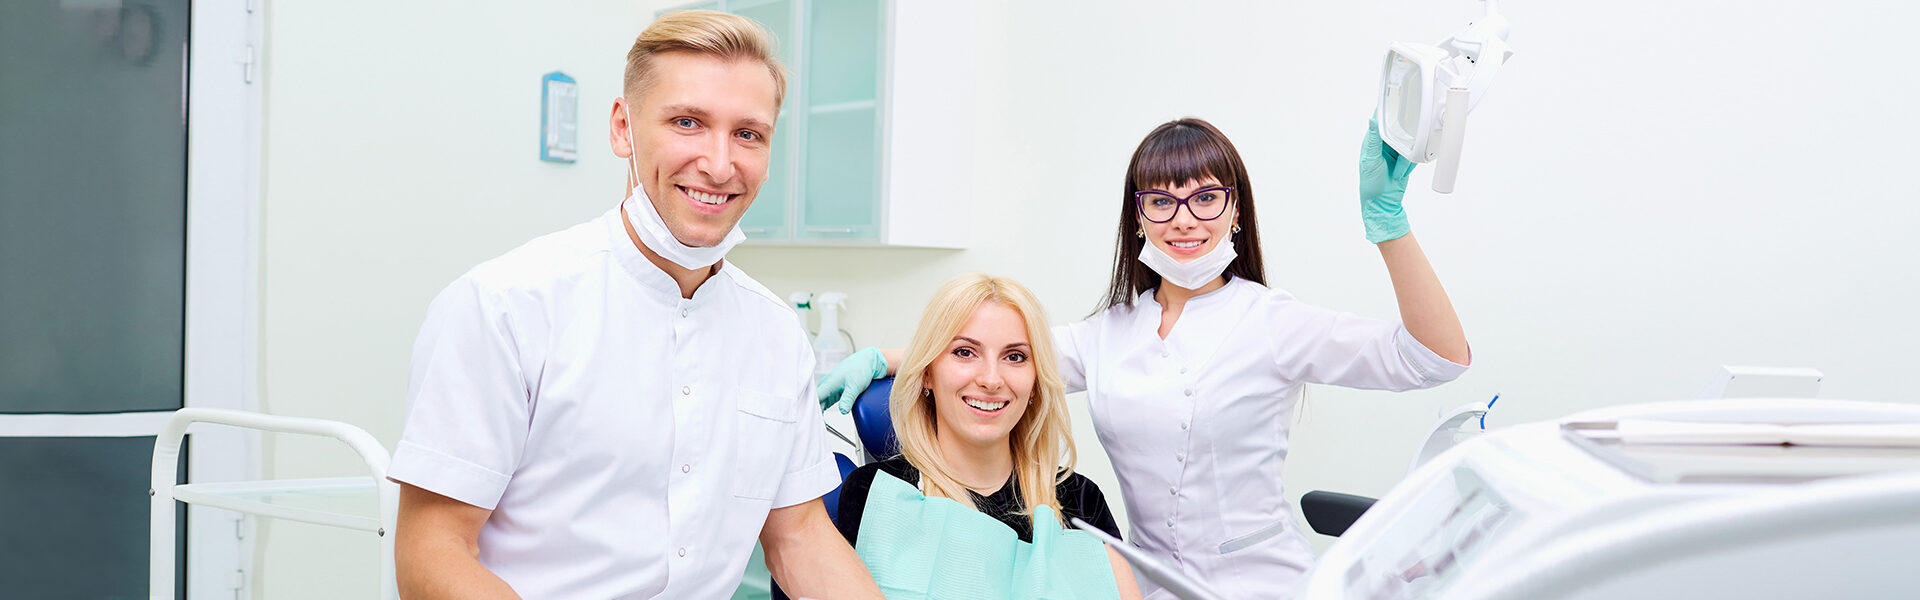 Six Dental Care Tips for the Whole Family